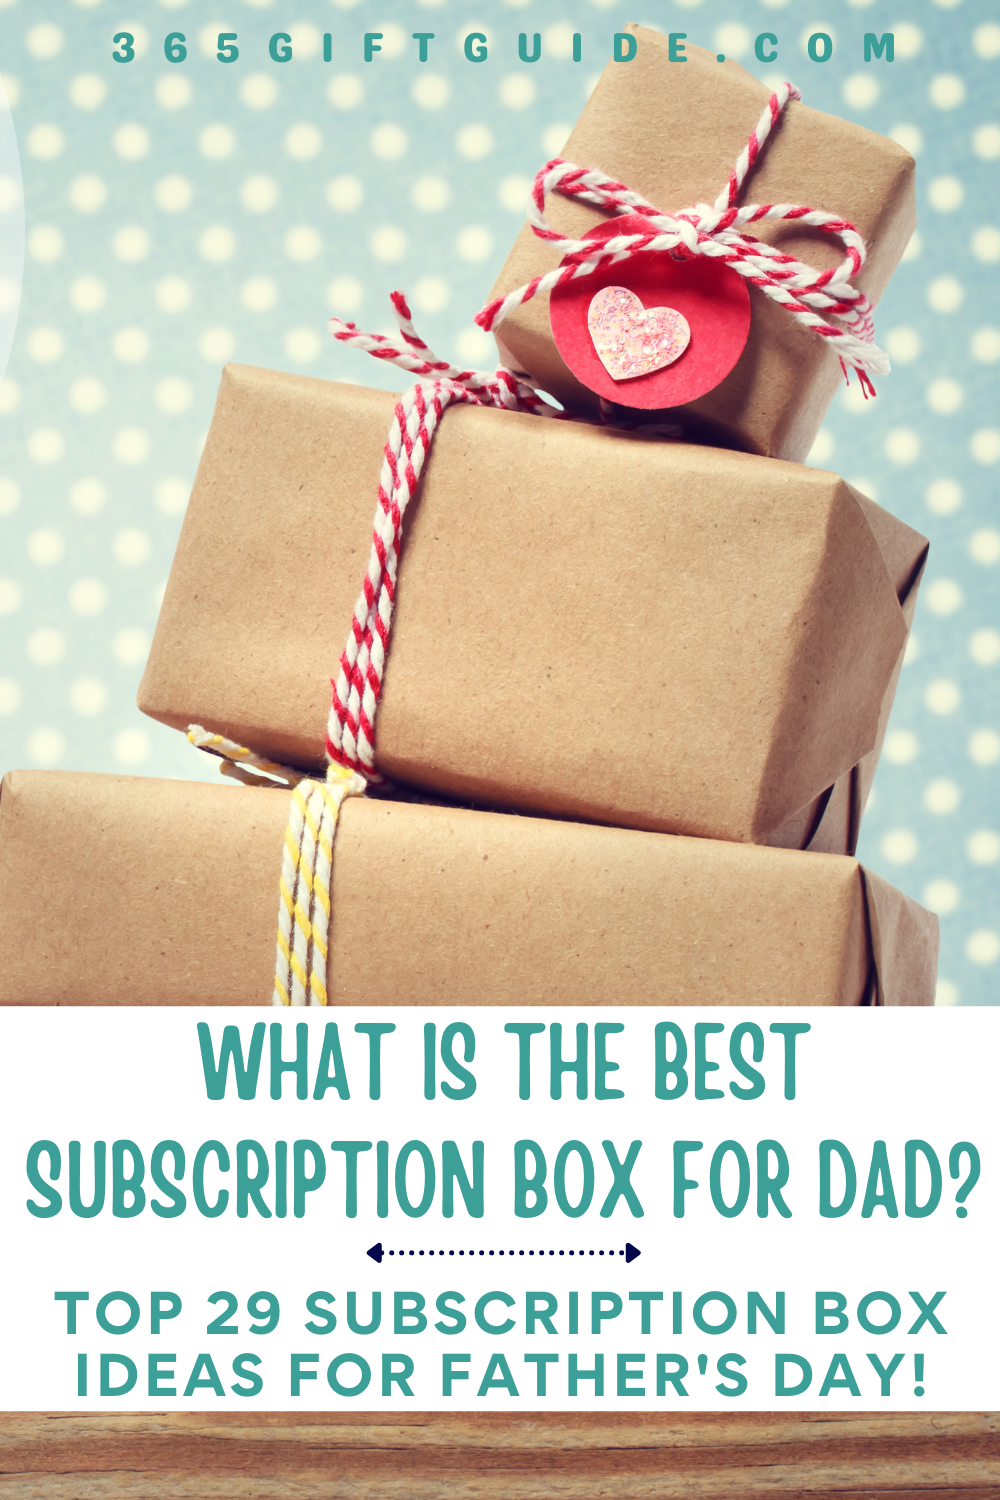 What is the Best Subscription Box for Dad?